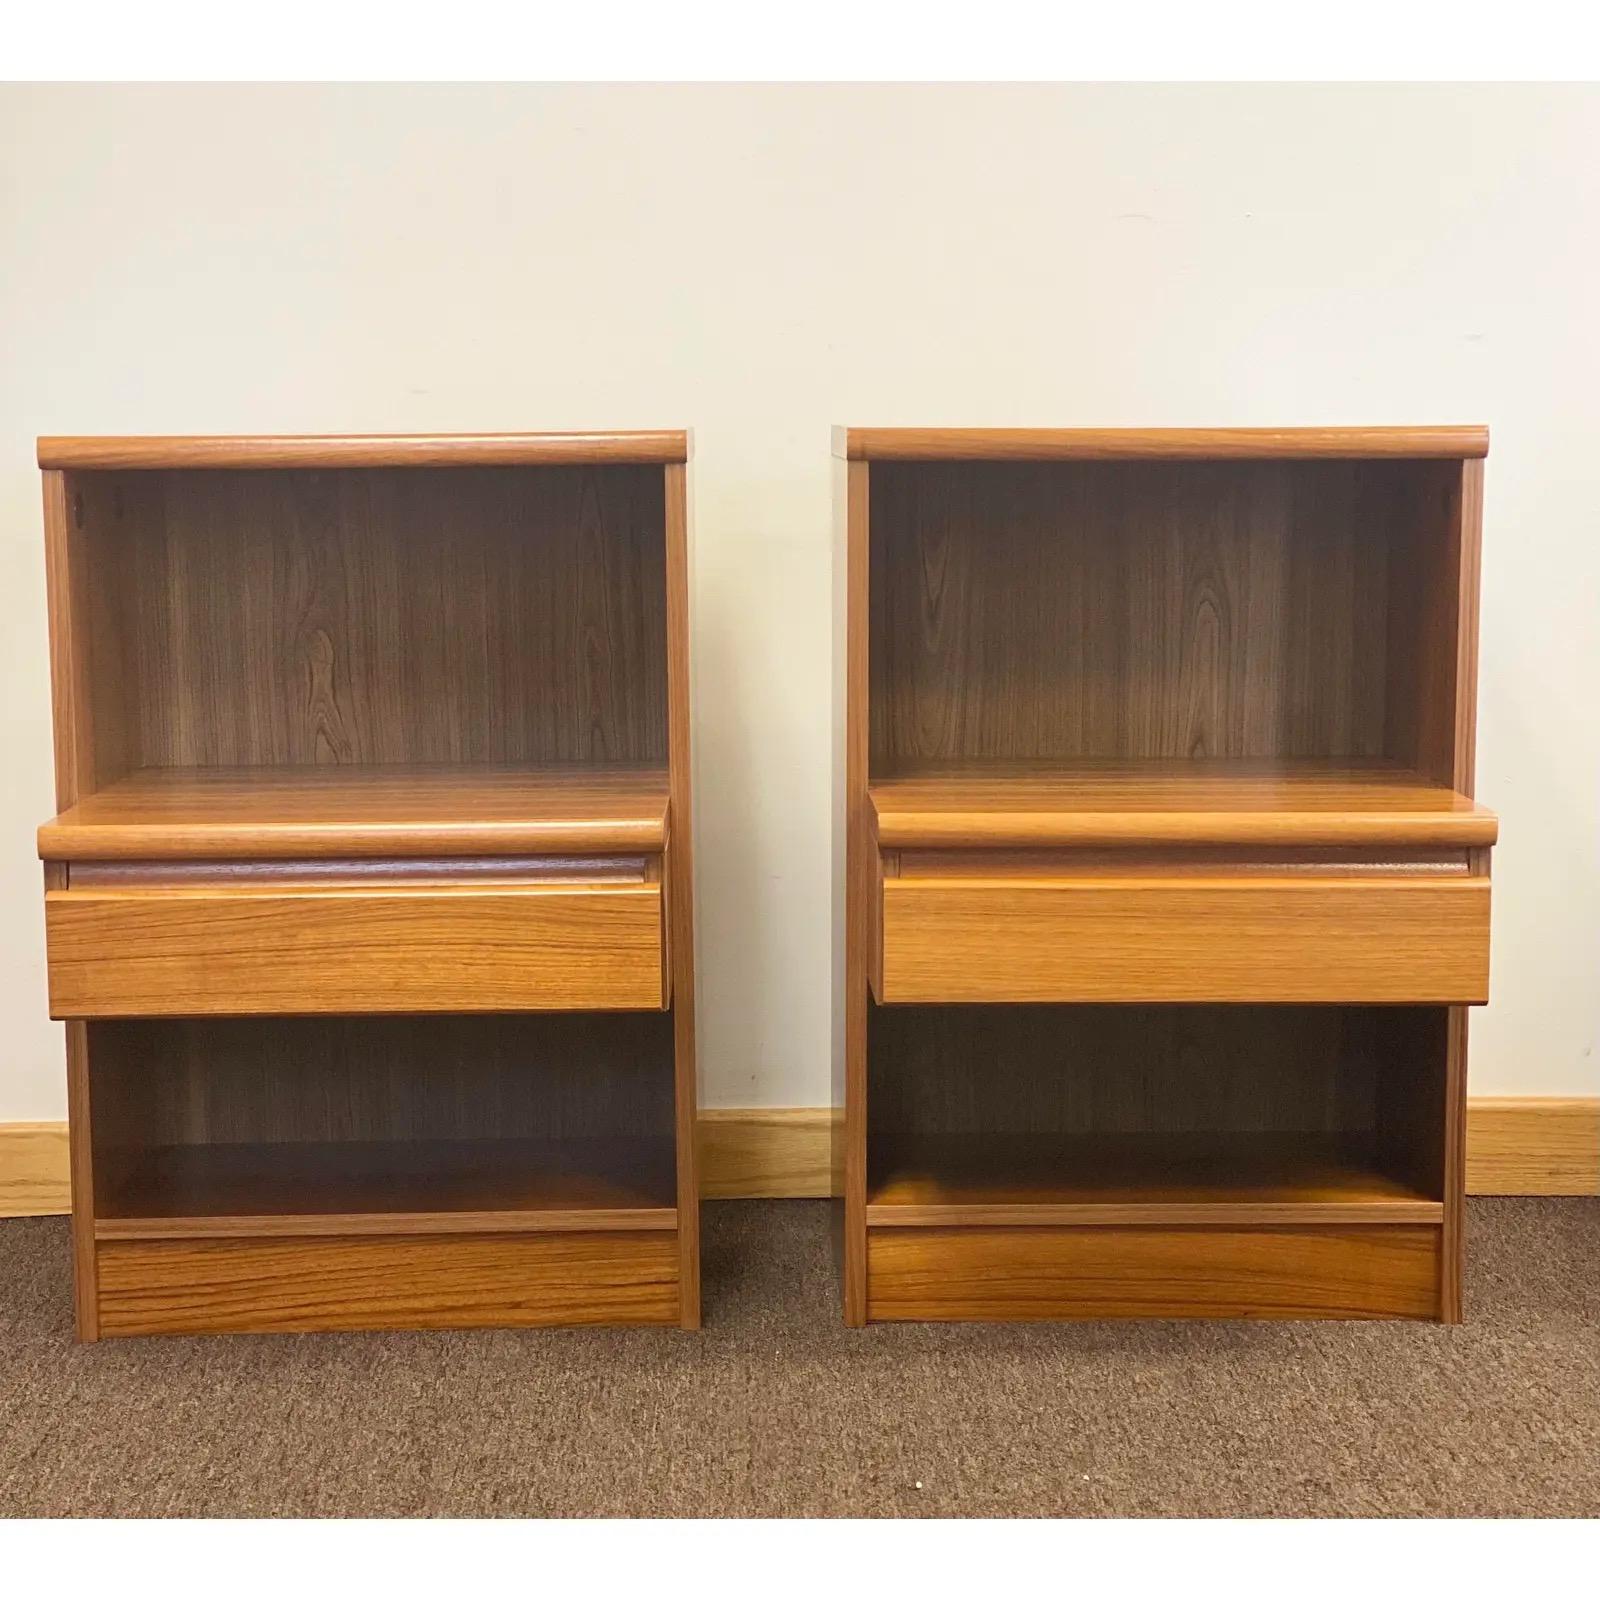 We are very pleased to offer a mid-century Danish pair of nightstands, circa the 1960s. These sturdy and heavy pieces are made of solid teak and a teak veneer backbone; hence, beautiful wood grains can be seen throughout. The nightstands feature